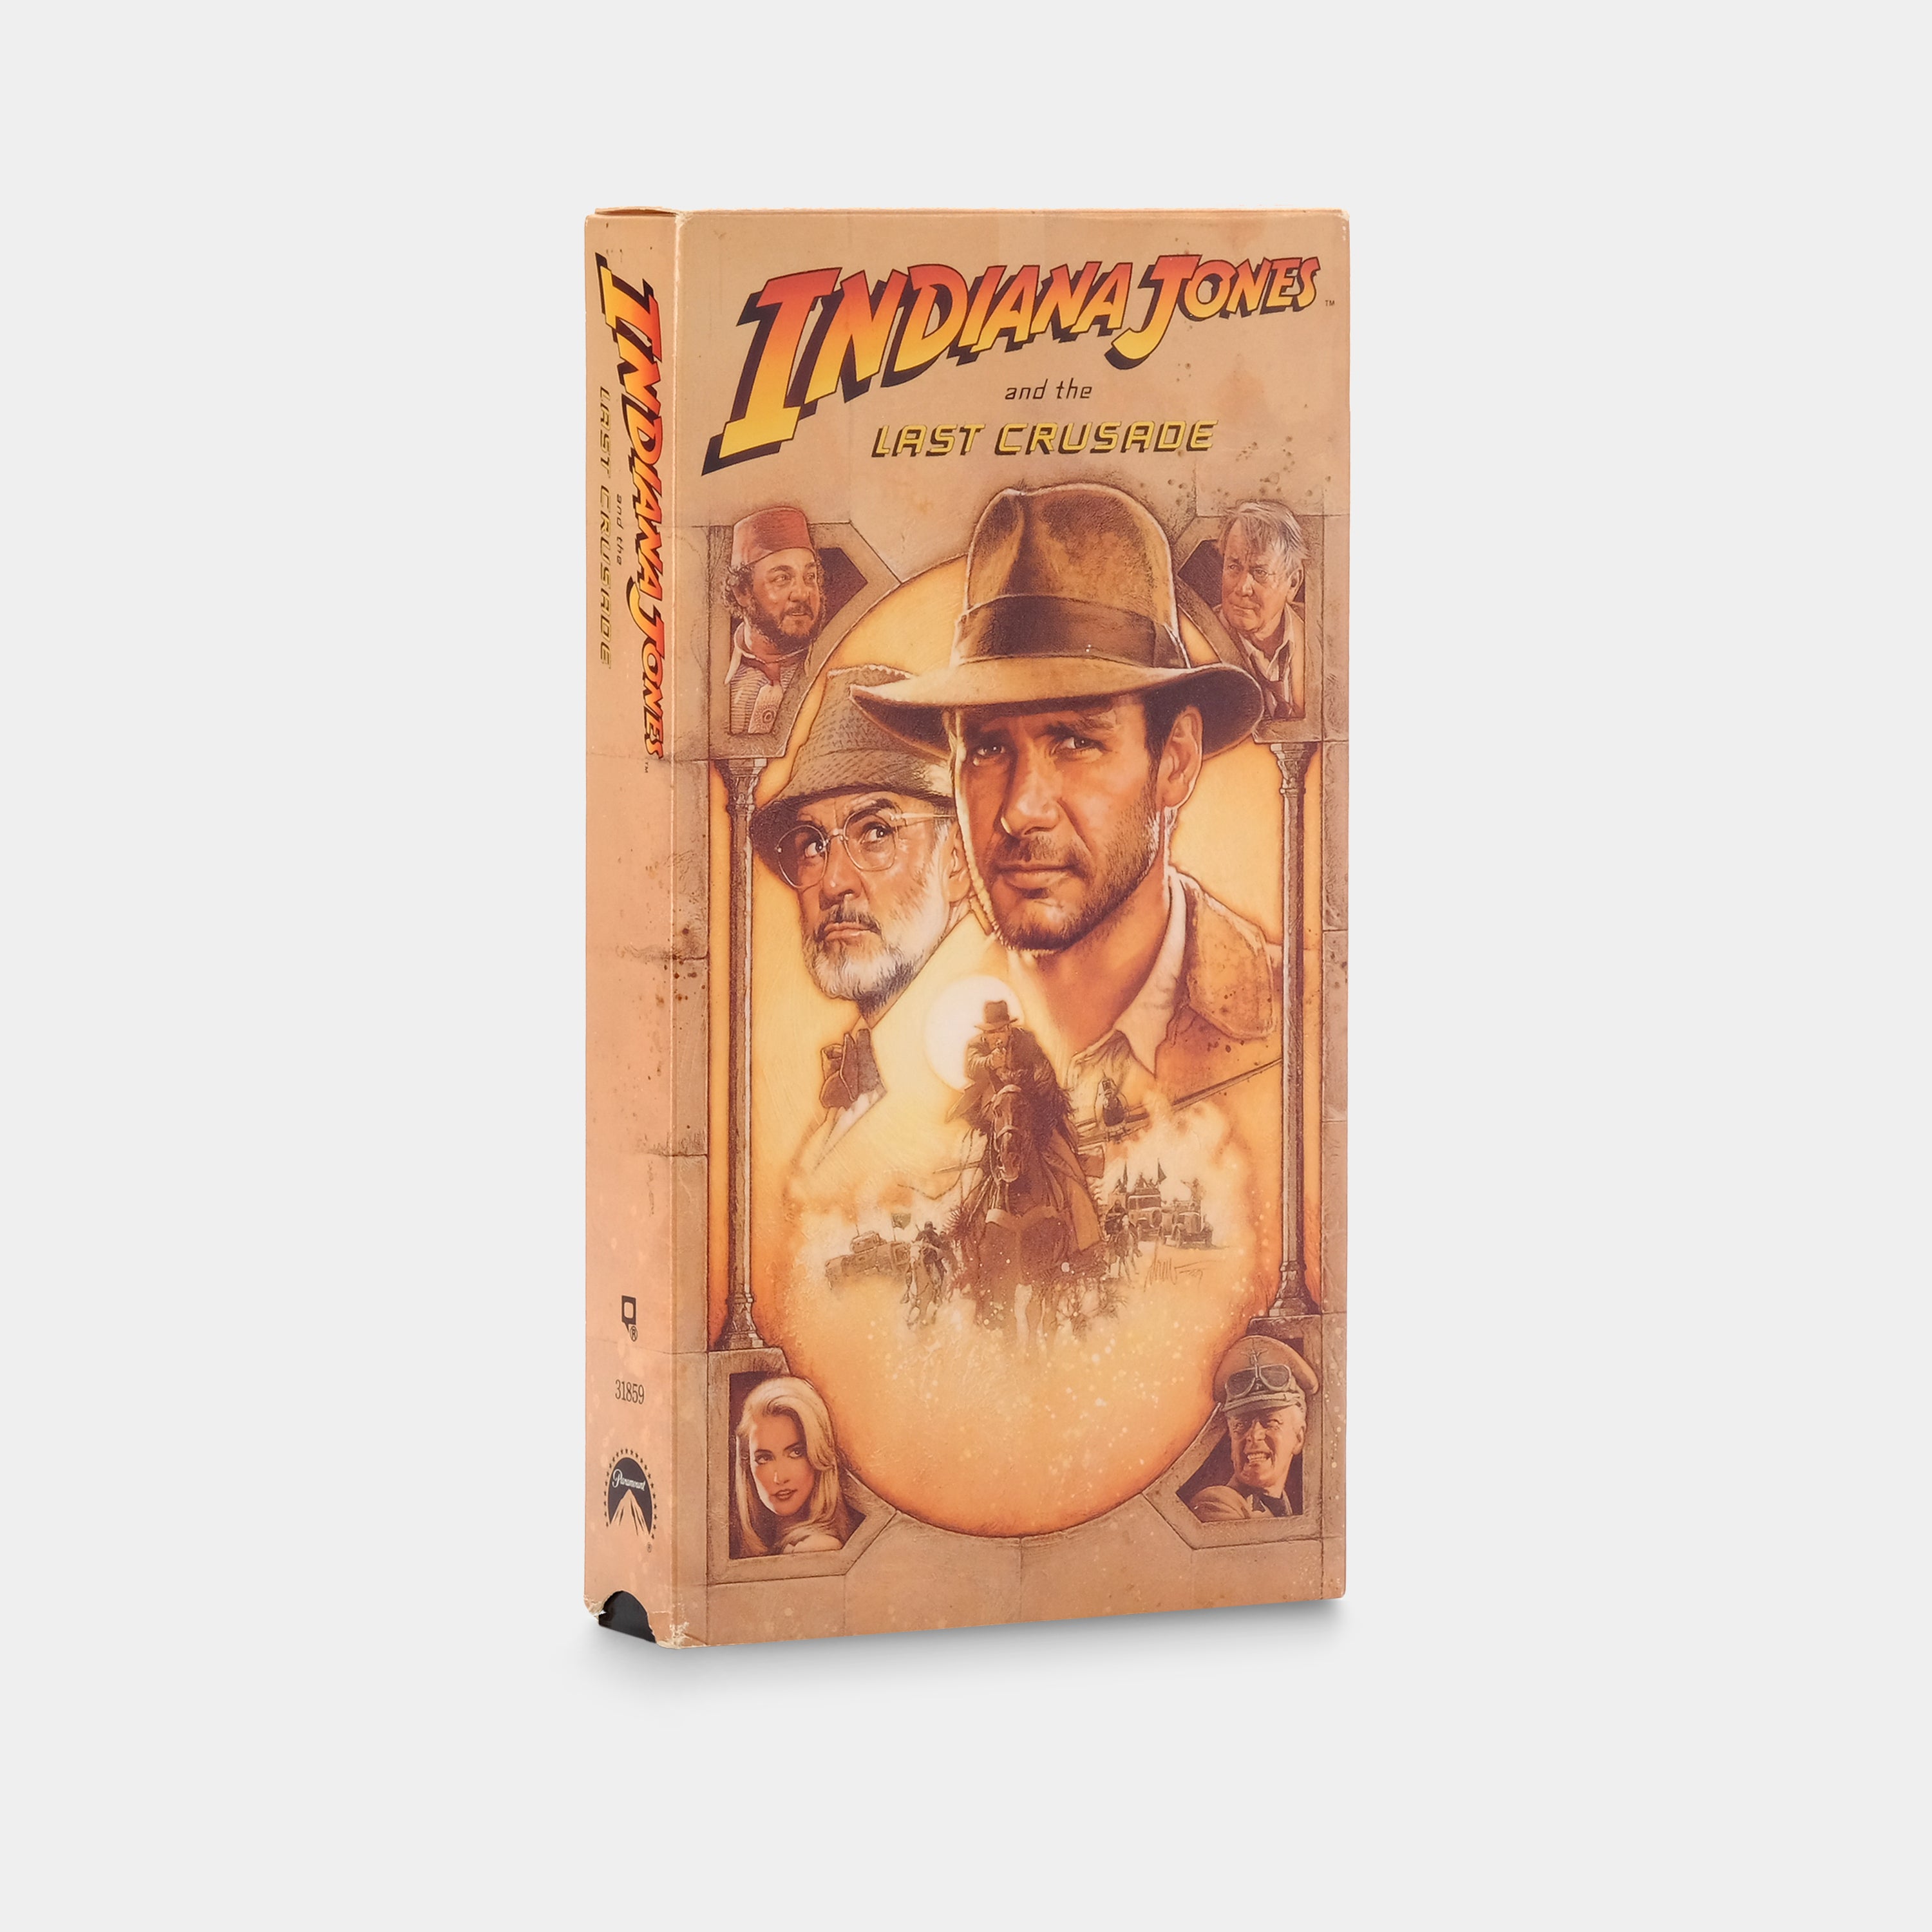 Indiana Jones and the Last Crusade VHS Tape